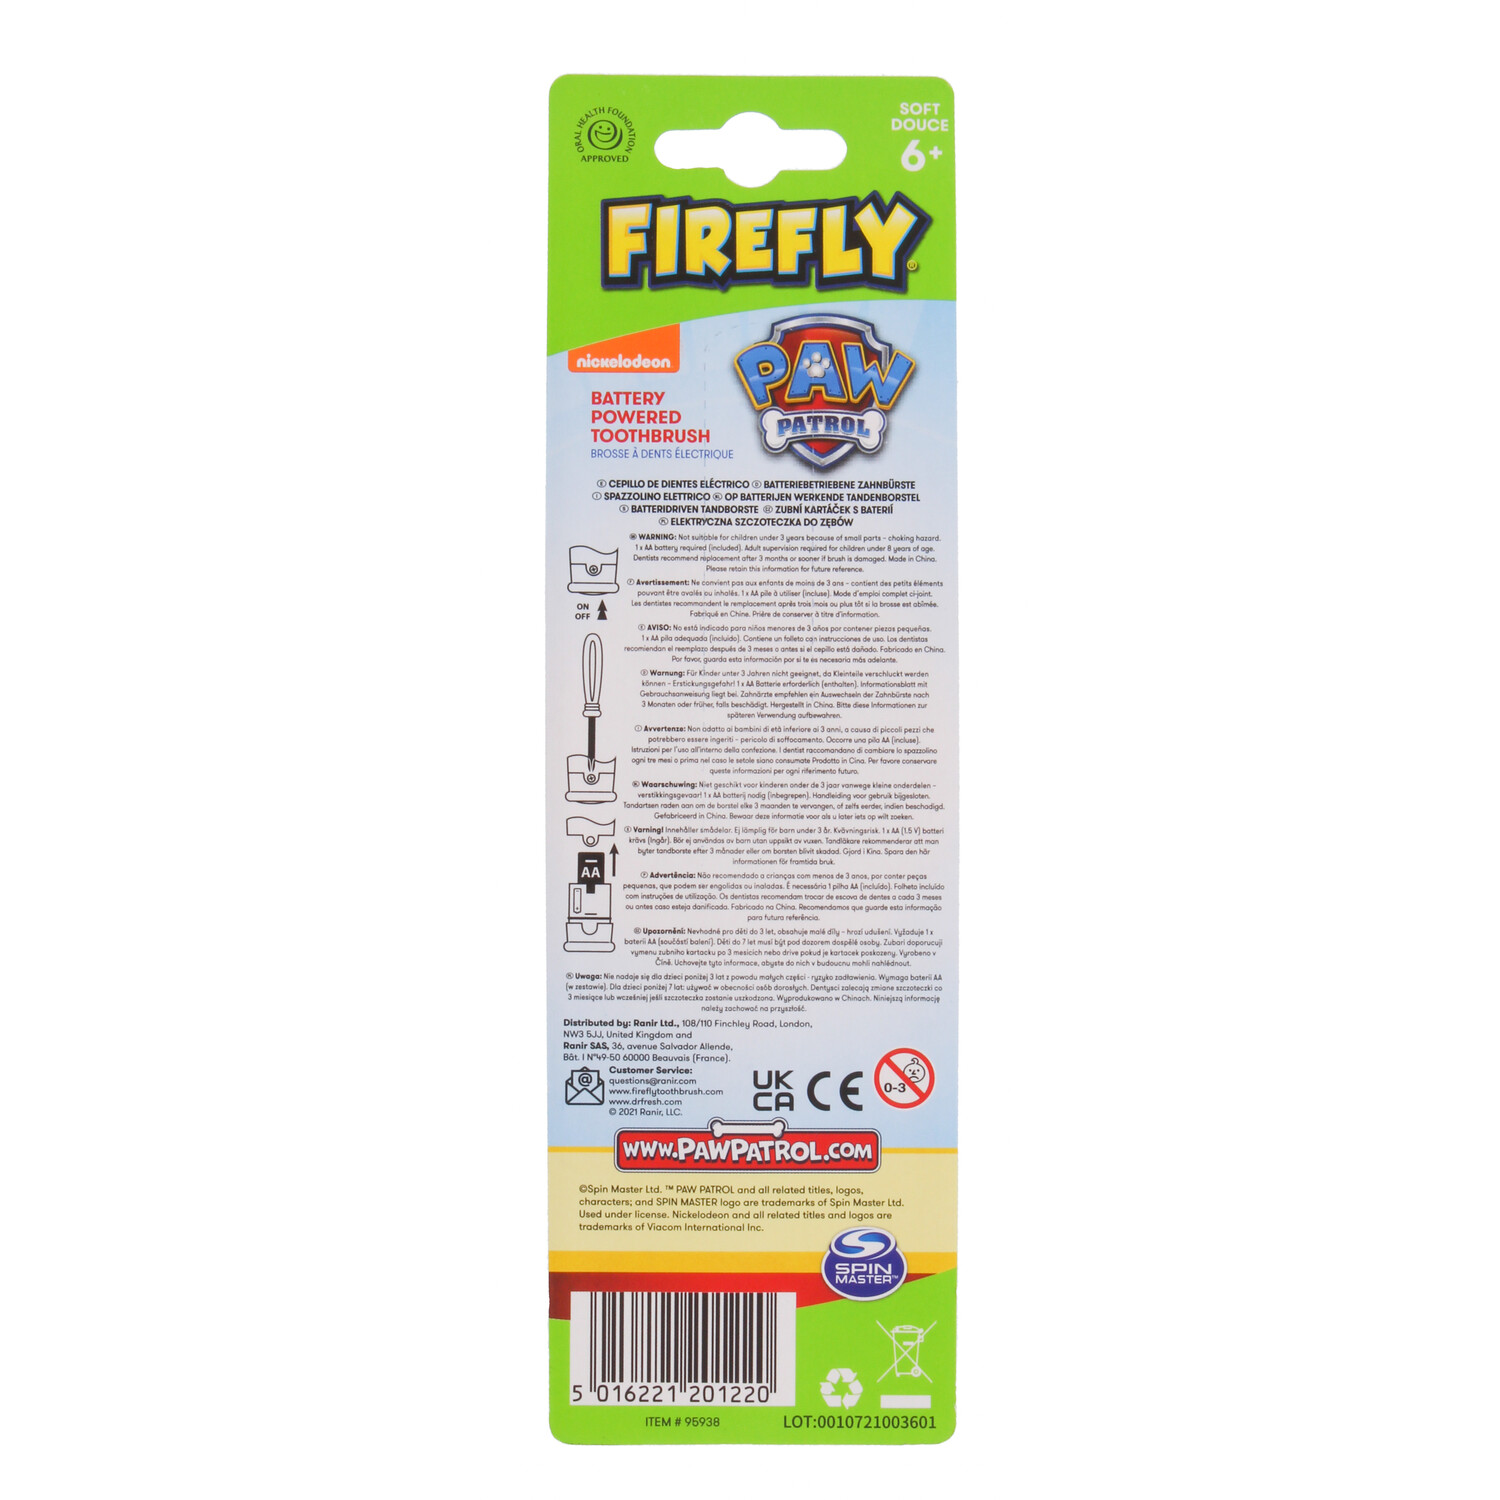 Firefly Paw Patrol Battery Powered Toothbrush - Pink Image 2